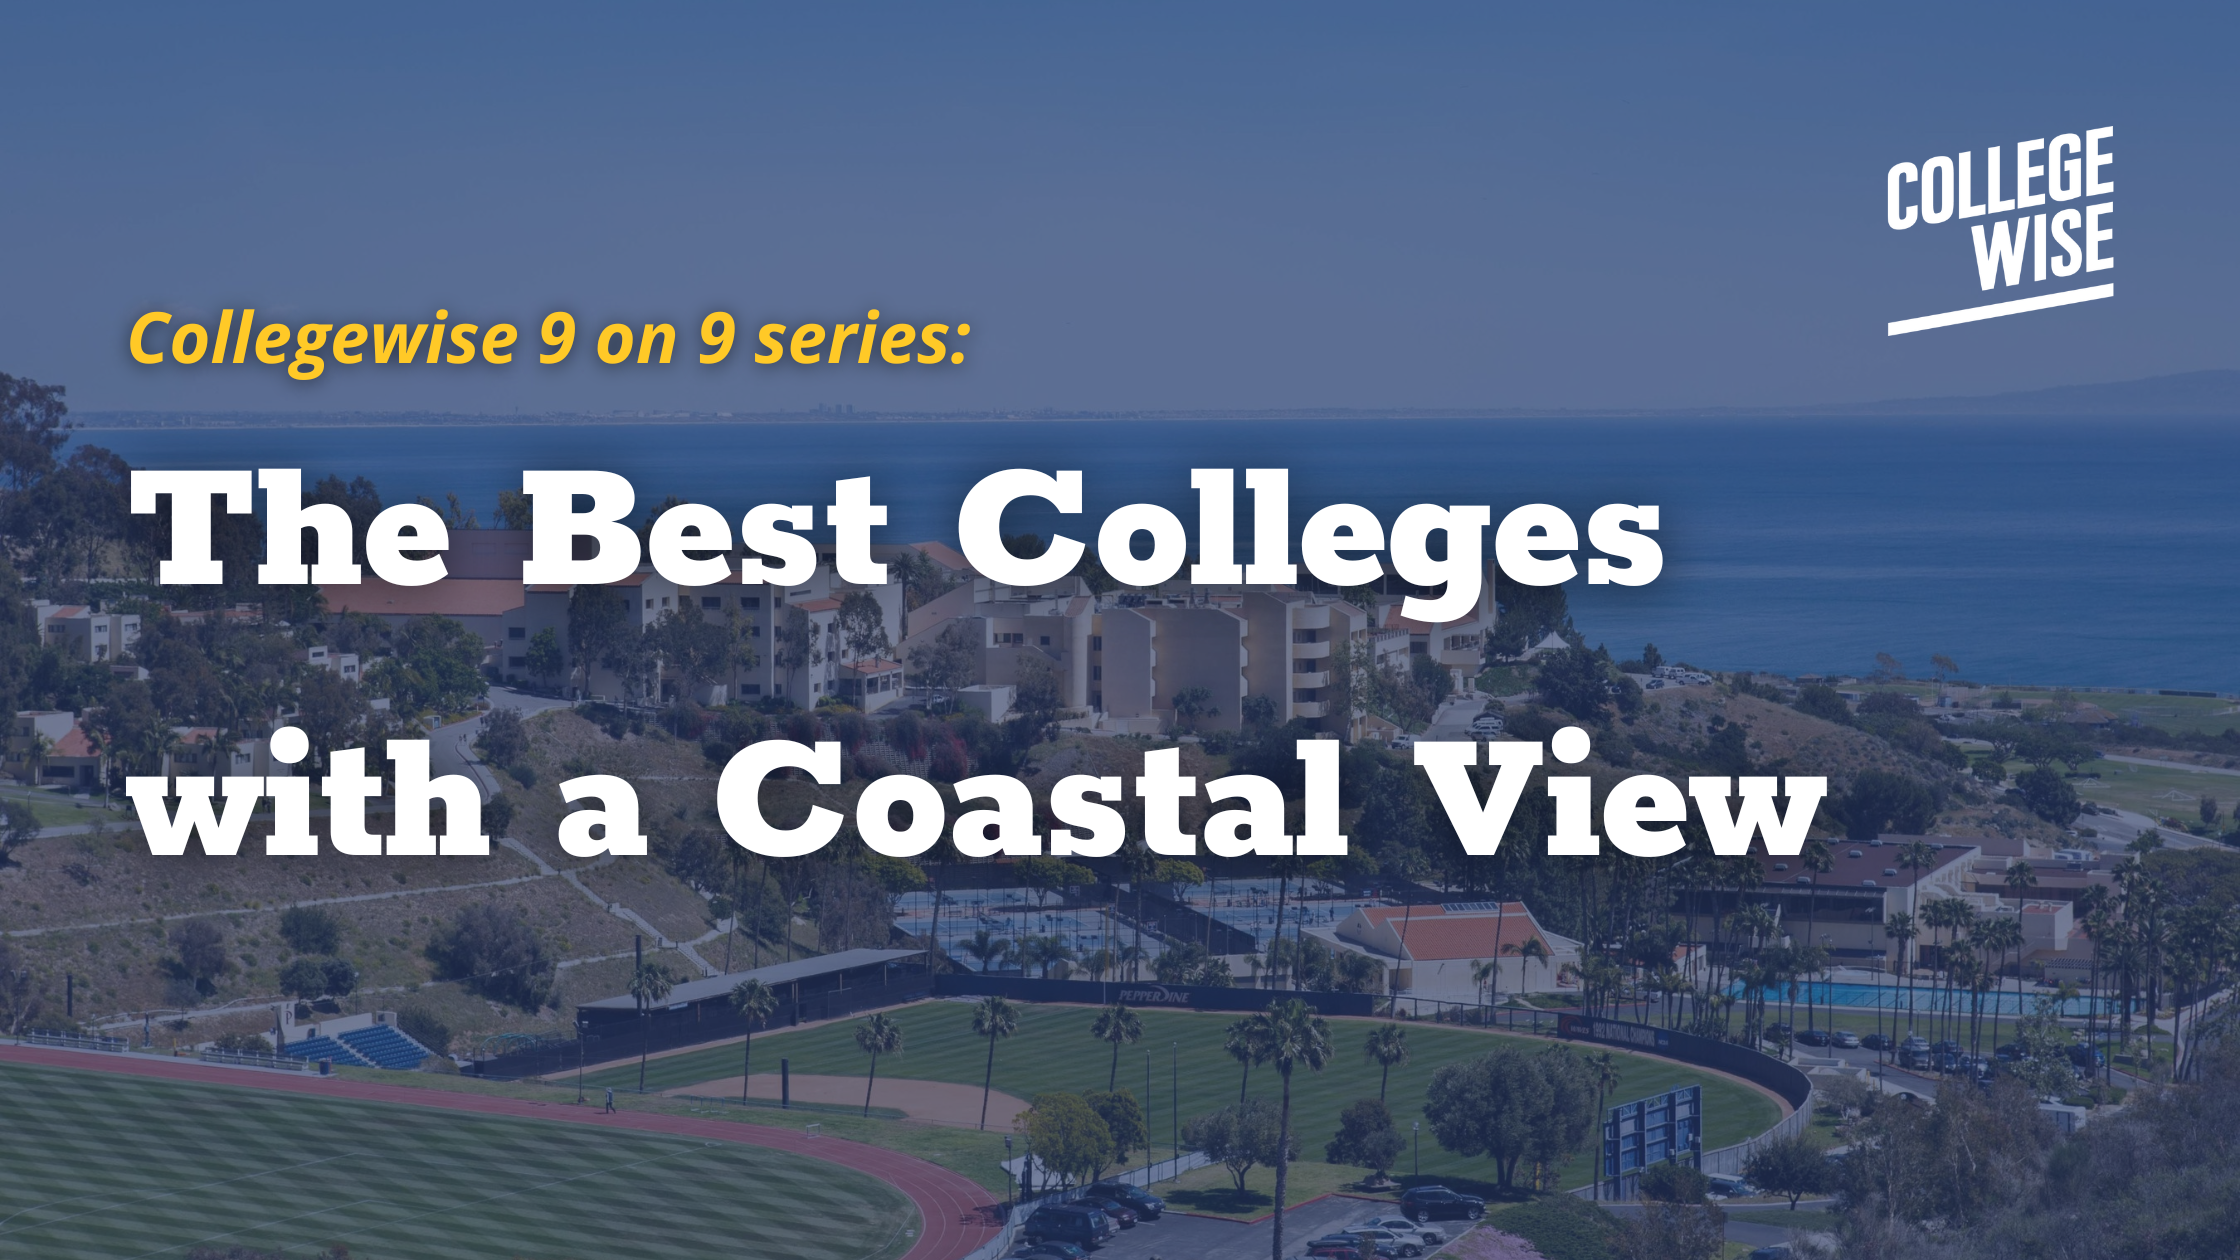 The Best Colleges with a Coastal View